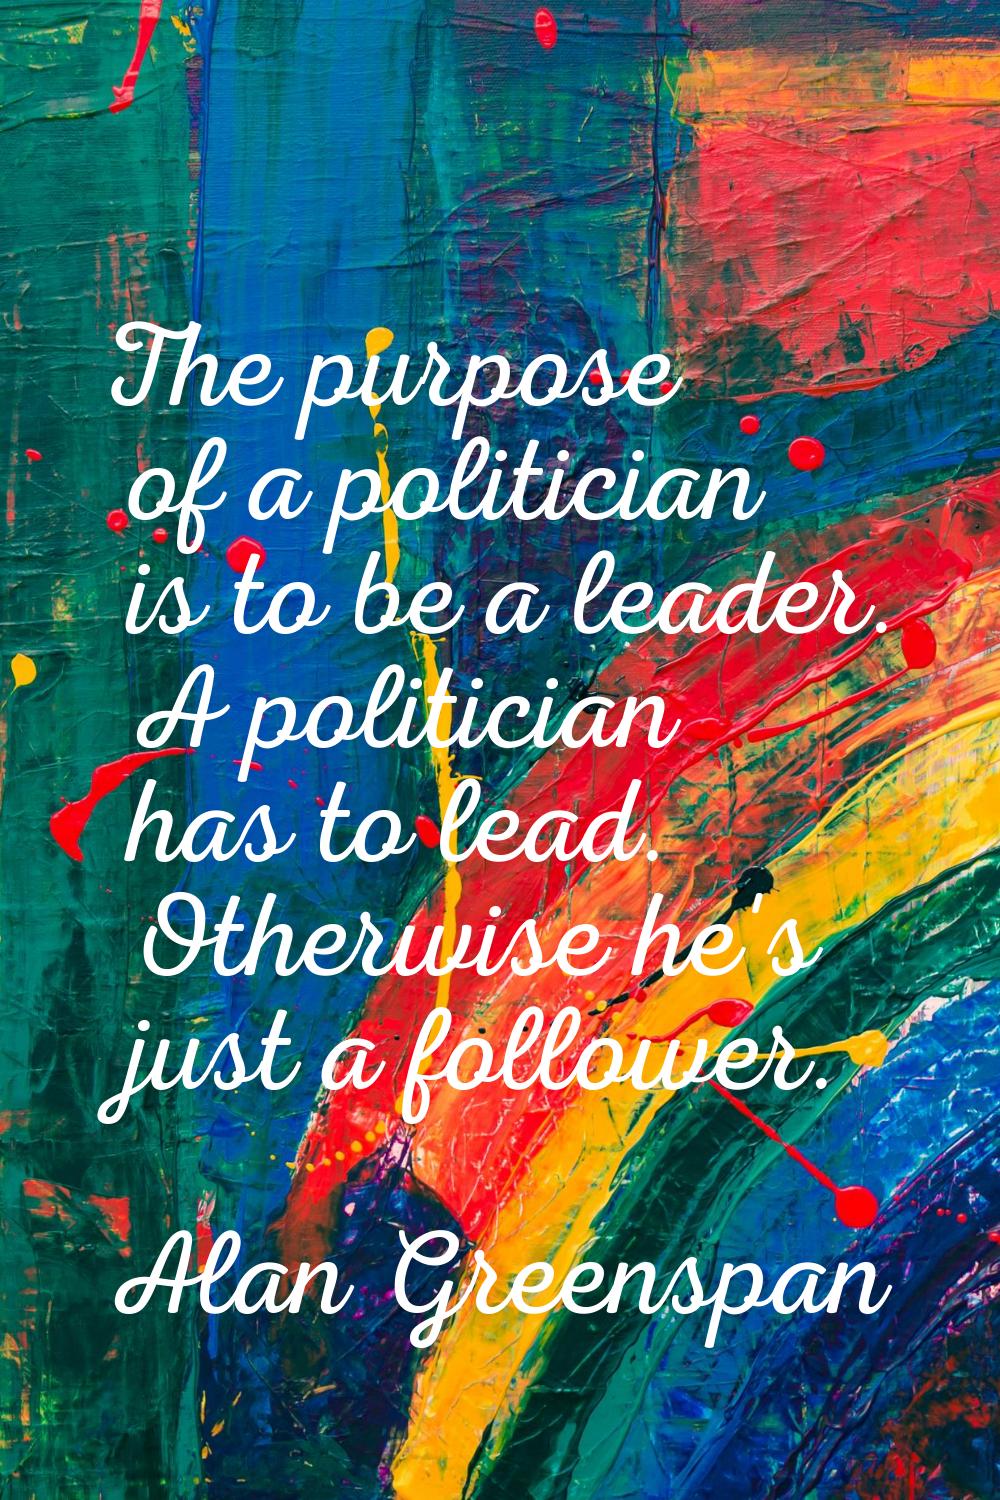 The purpose of a politician is to be a leader. A politician has to lead. Otherwise he's just a foll